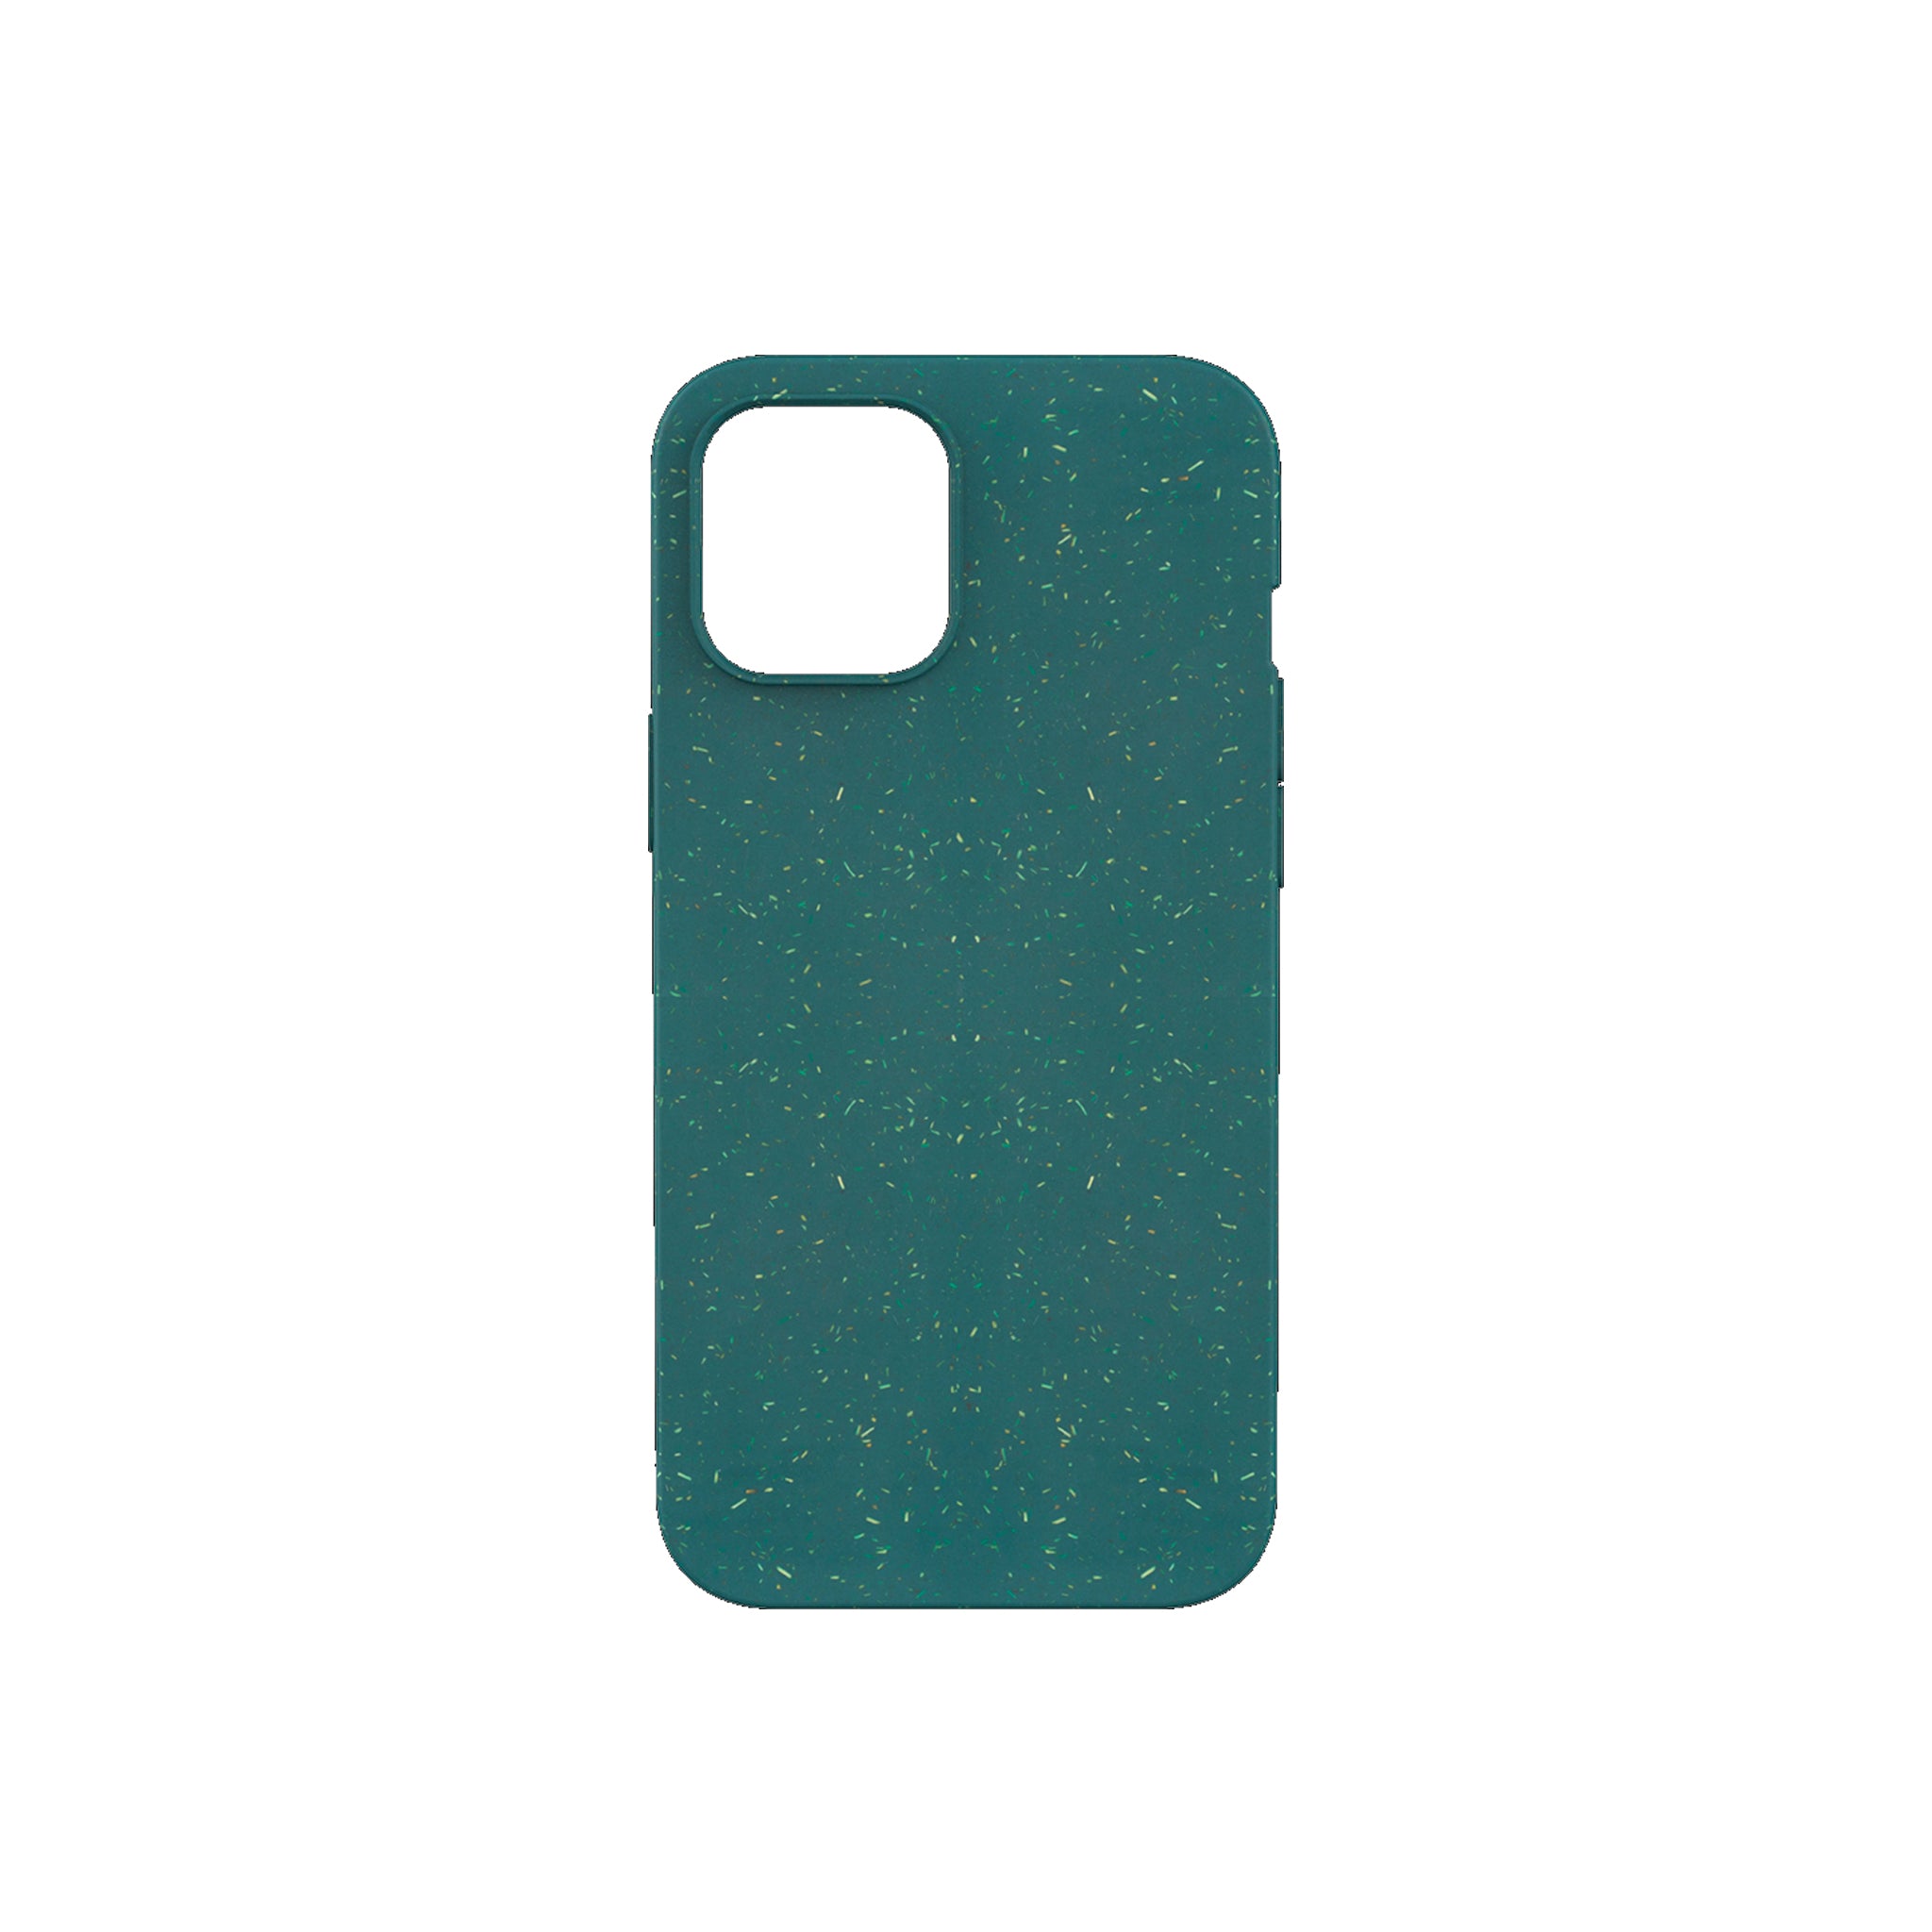 Pela - Eco Friendly Case For Apple Iphone 12 Pro Max - Green